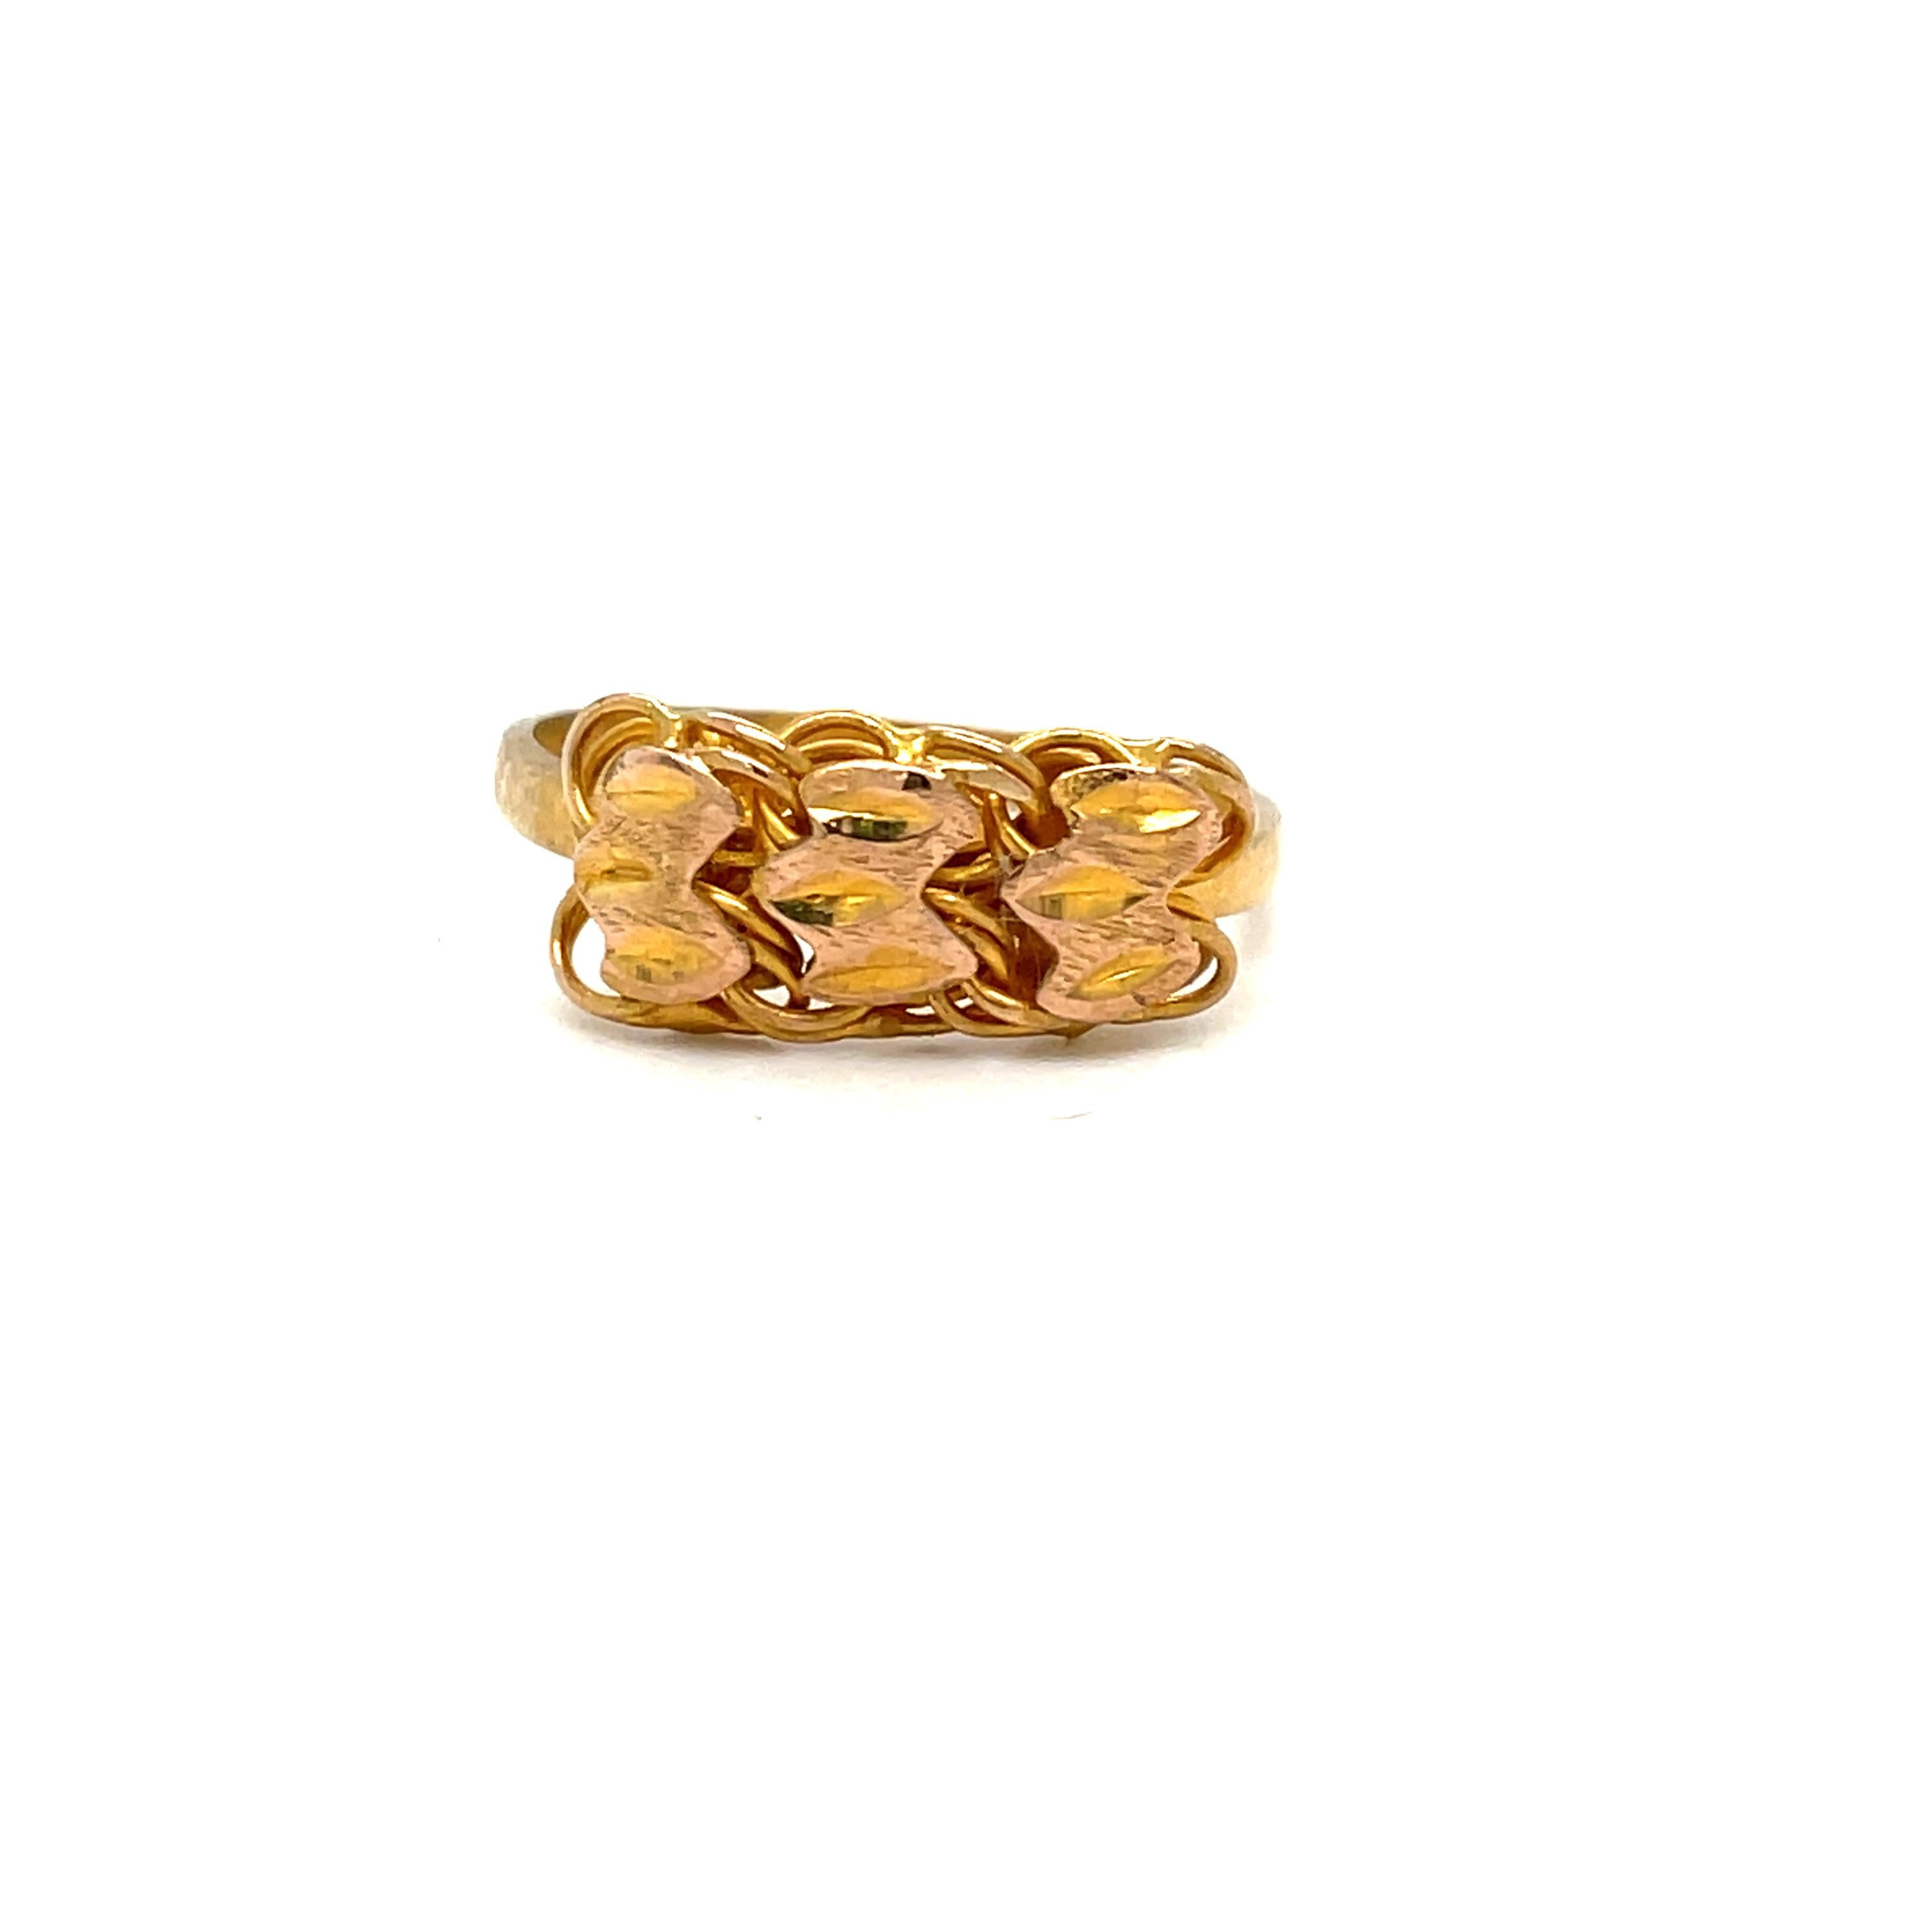 This vintage Bismarck ring is really beautiful! It's made by hand and has a pretty textural linking pattern that's both classic and traditional.
The ring is made of 21k yellow gold, which makes it look rich and warm. It's 7.8 mm wide at the top and